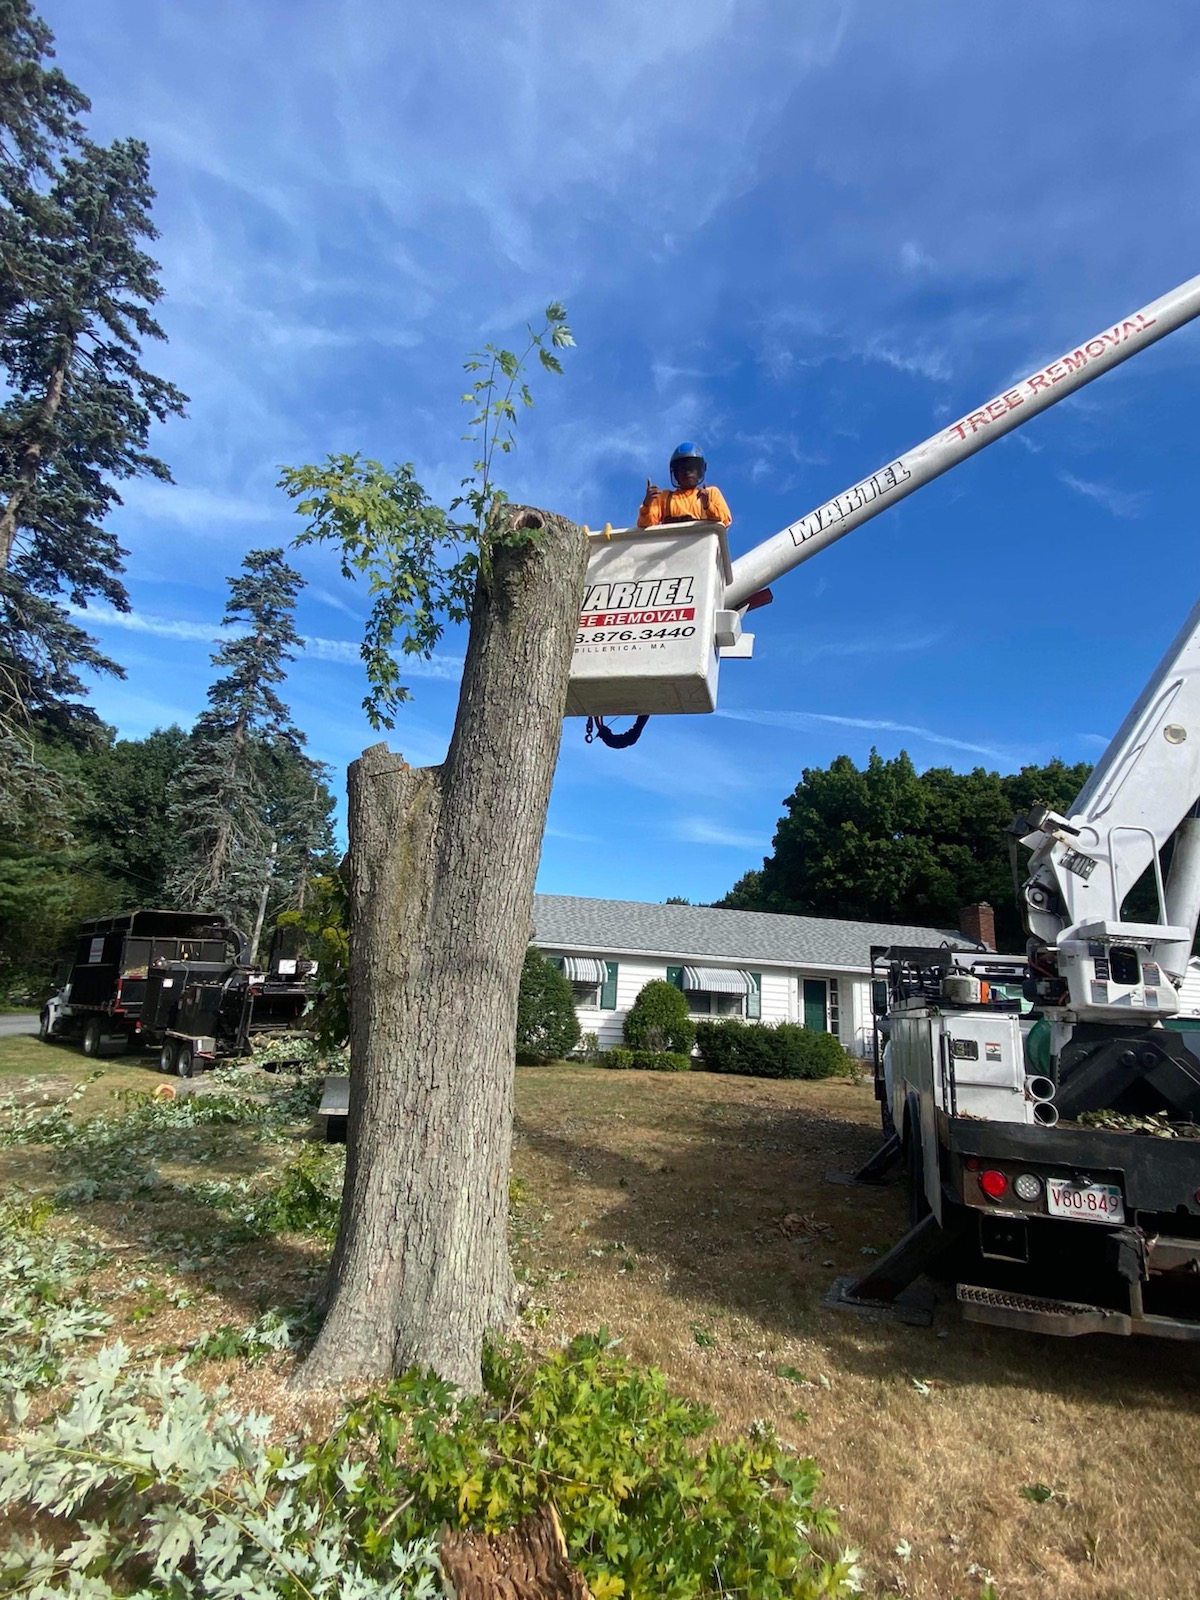 Tree Removal and Bucket Work in Lexington, MA.